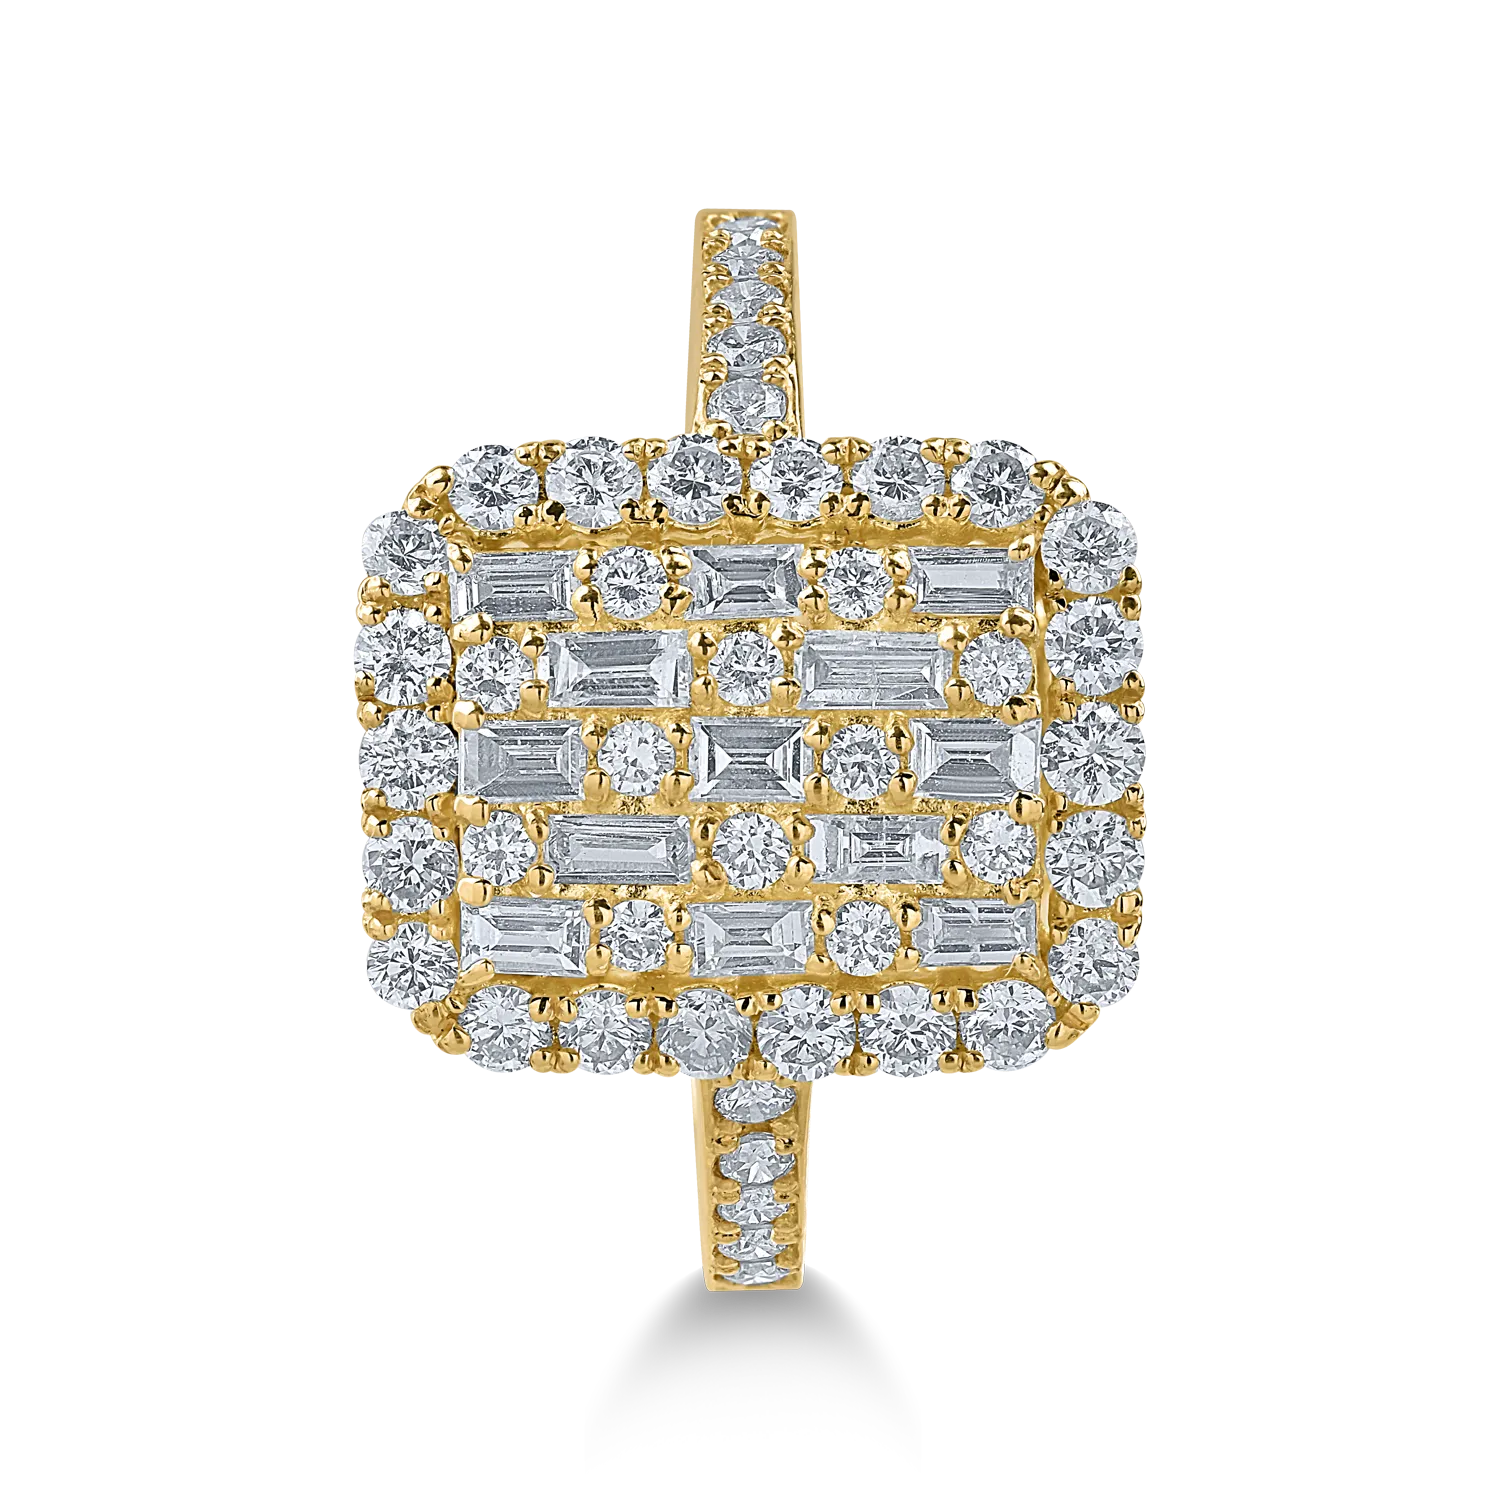 Yellow gold ring with 1ct diamonds